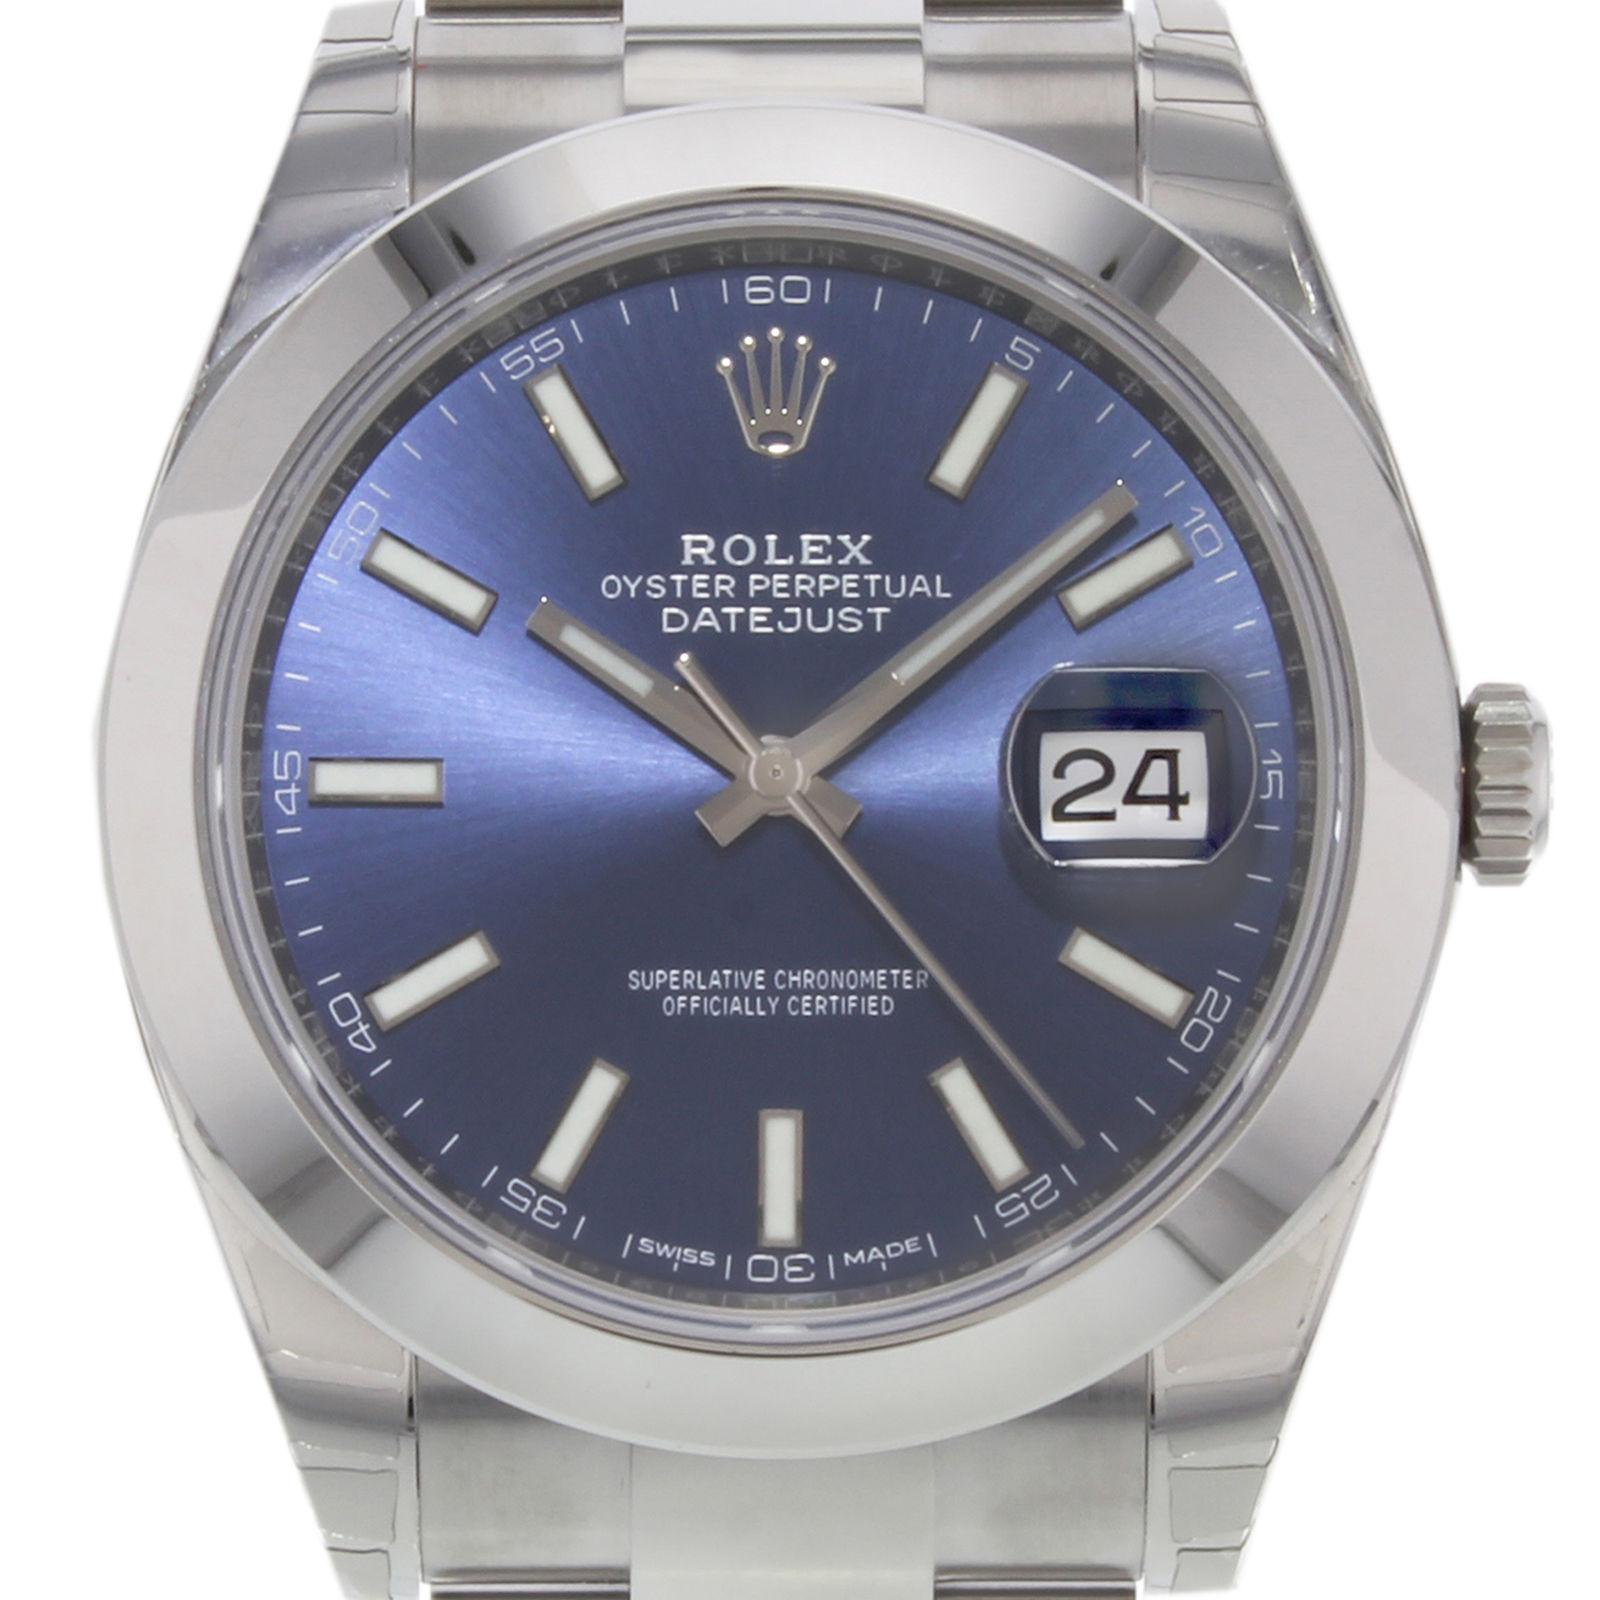 (19561)
This brand new Rolex Datejust 41 126300 blio is a beautiful men's timepiece that is powered by an automatic movement which is cased in a stainless steel case. It has a round shape face, date dial and has hand sticks style markers. It is